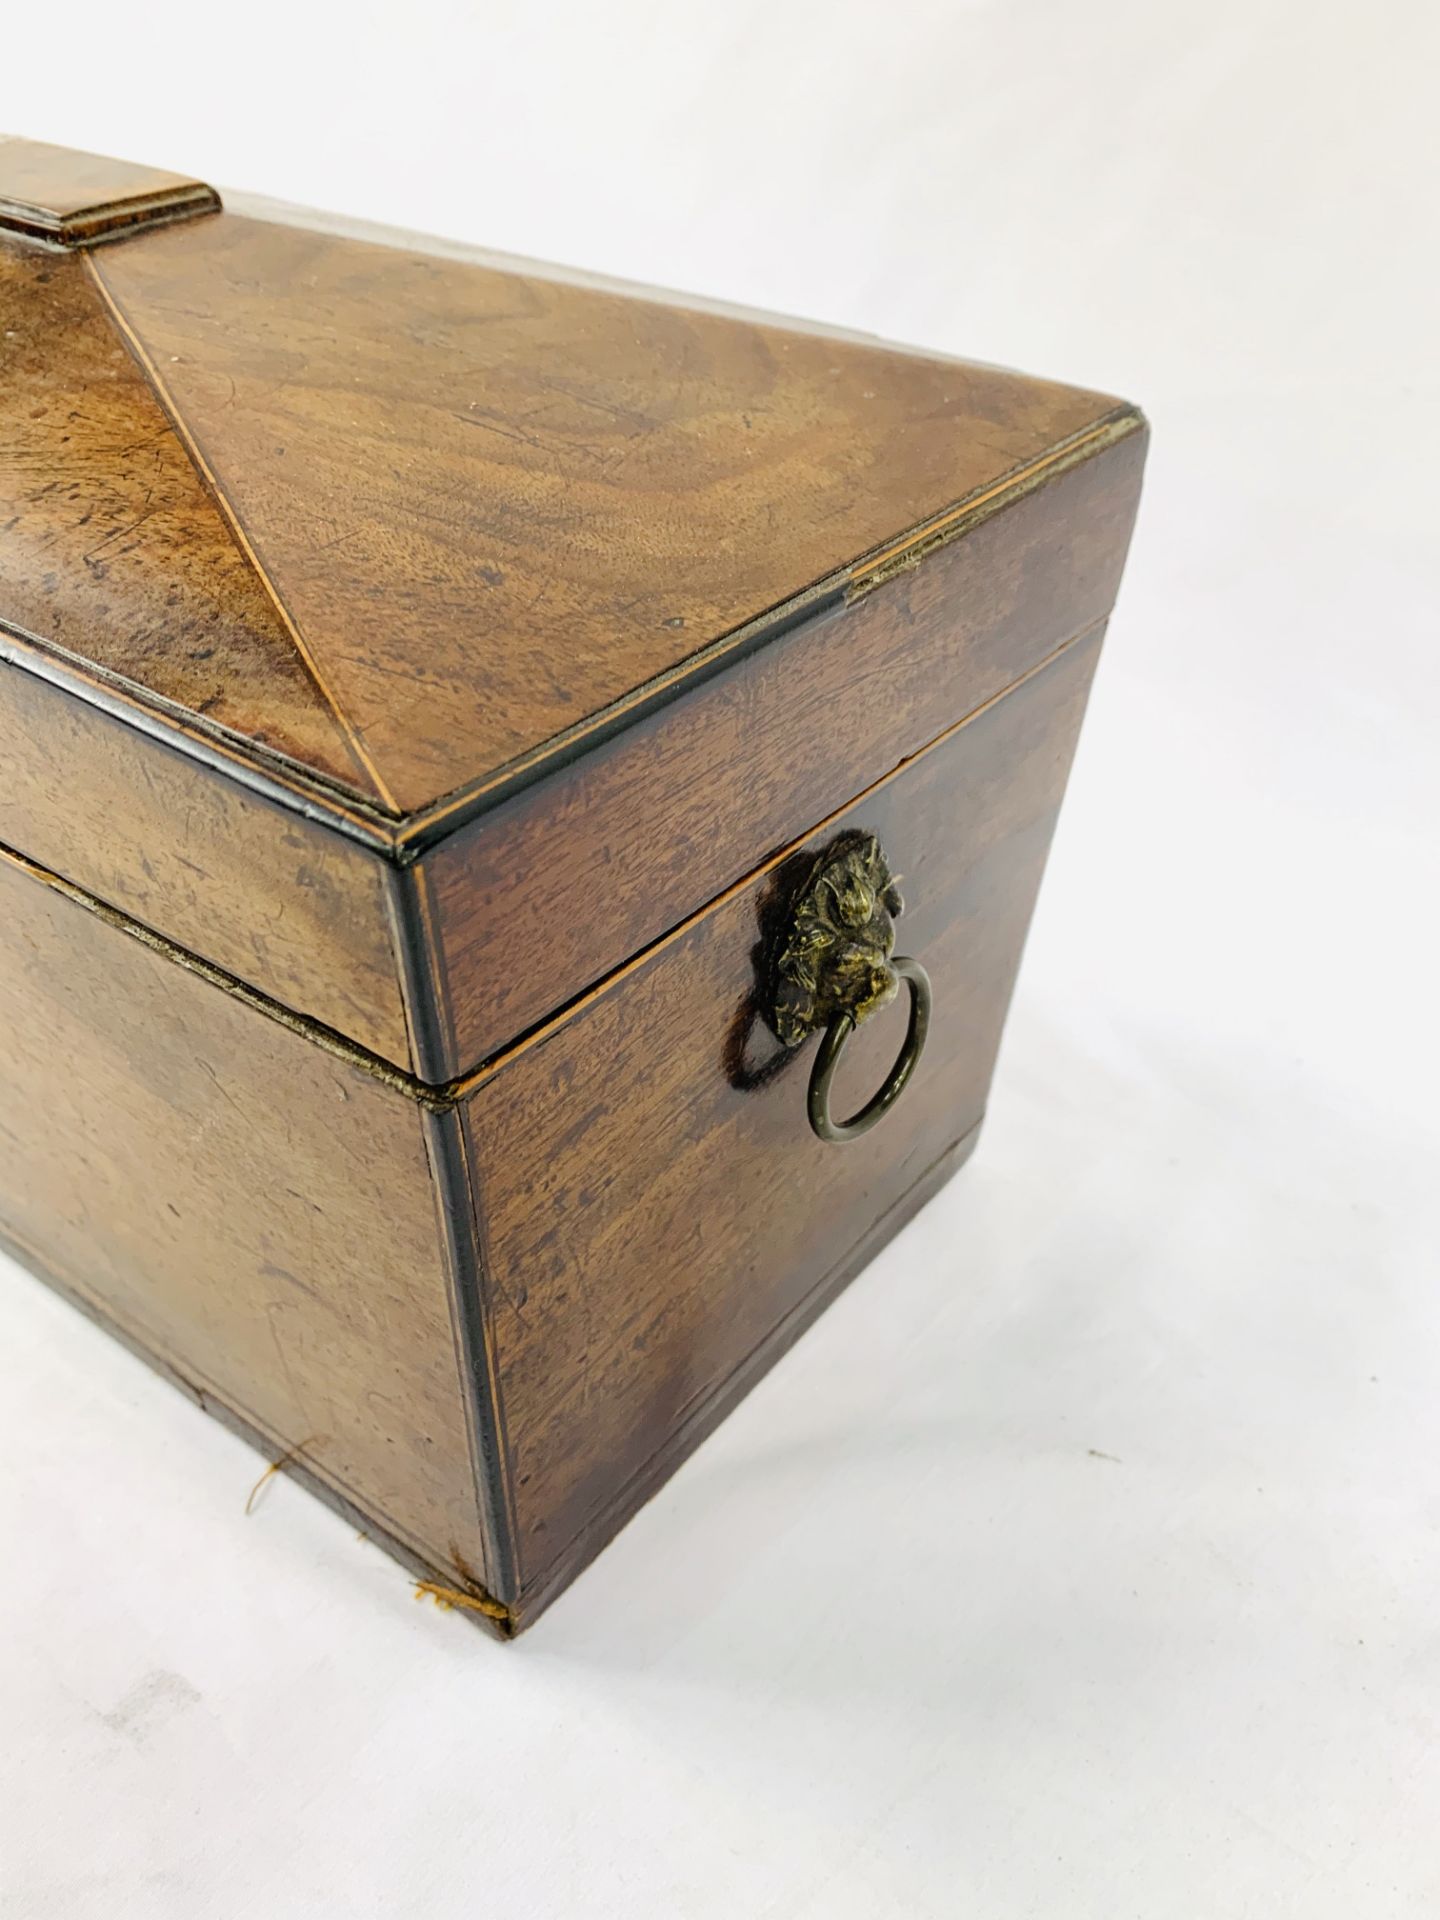 Early 19th Century sarcophagus tea caddy, requires repair. Complete with three glass bowls. - Image 3 of 5